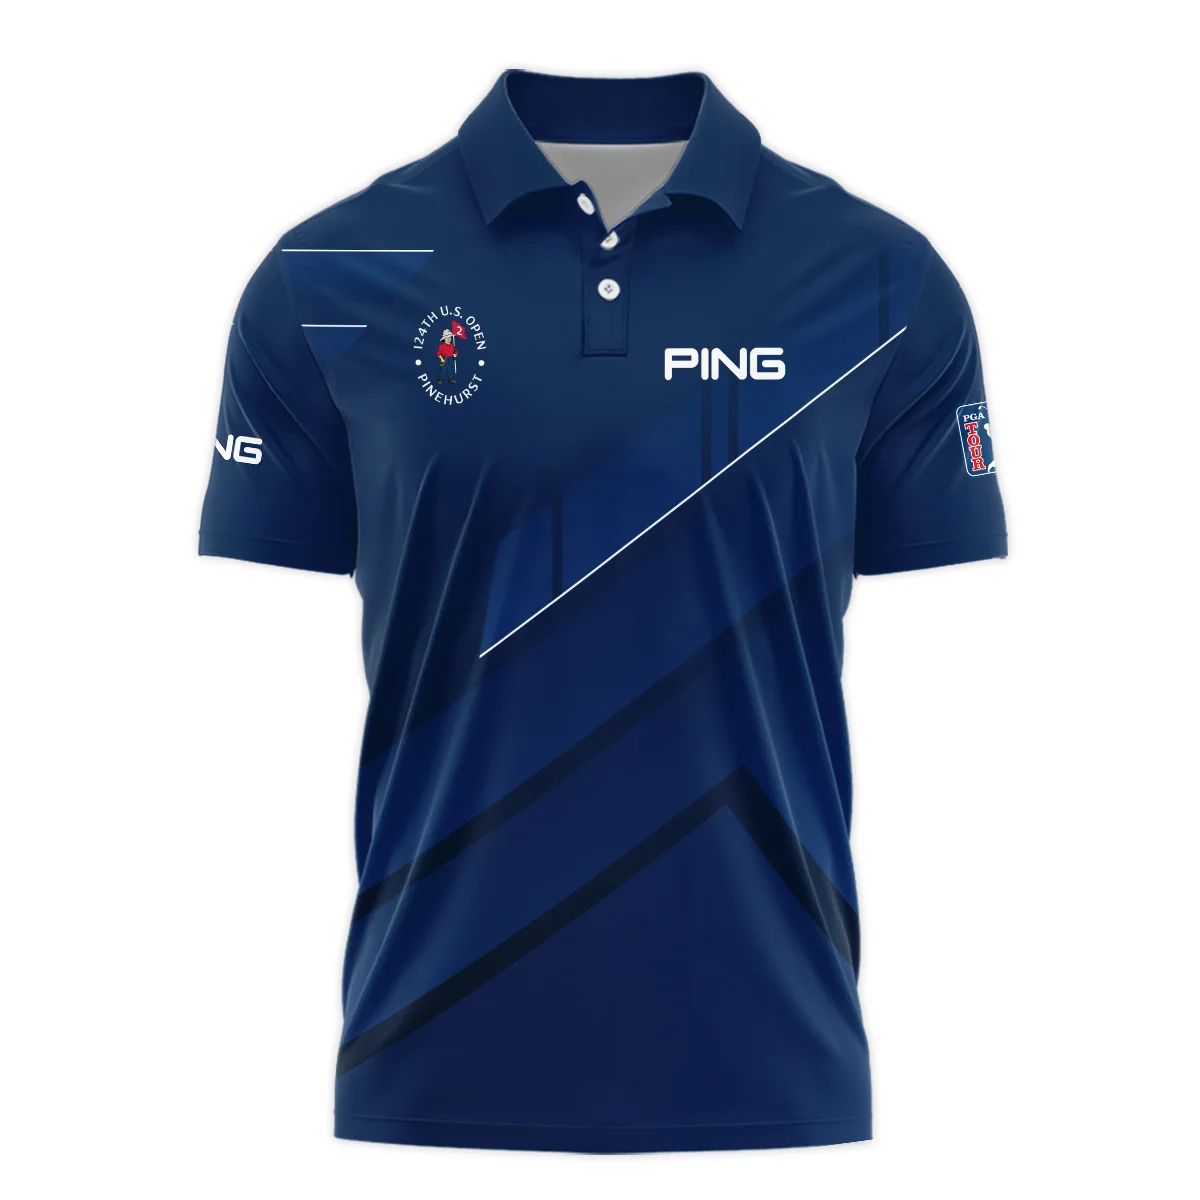 Ping 124th U.S. Open Pinehurst Blue Gradient With White Straight Line Polo Shirt Style Classic Polo Shirt For Men